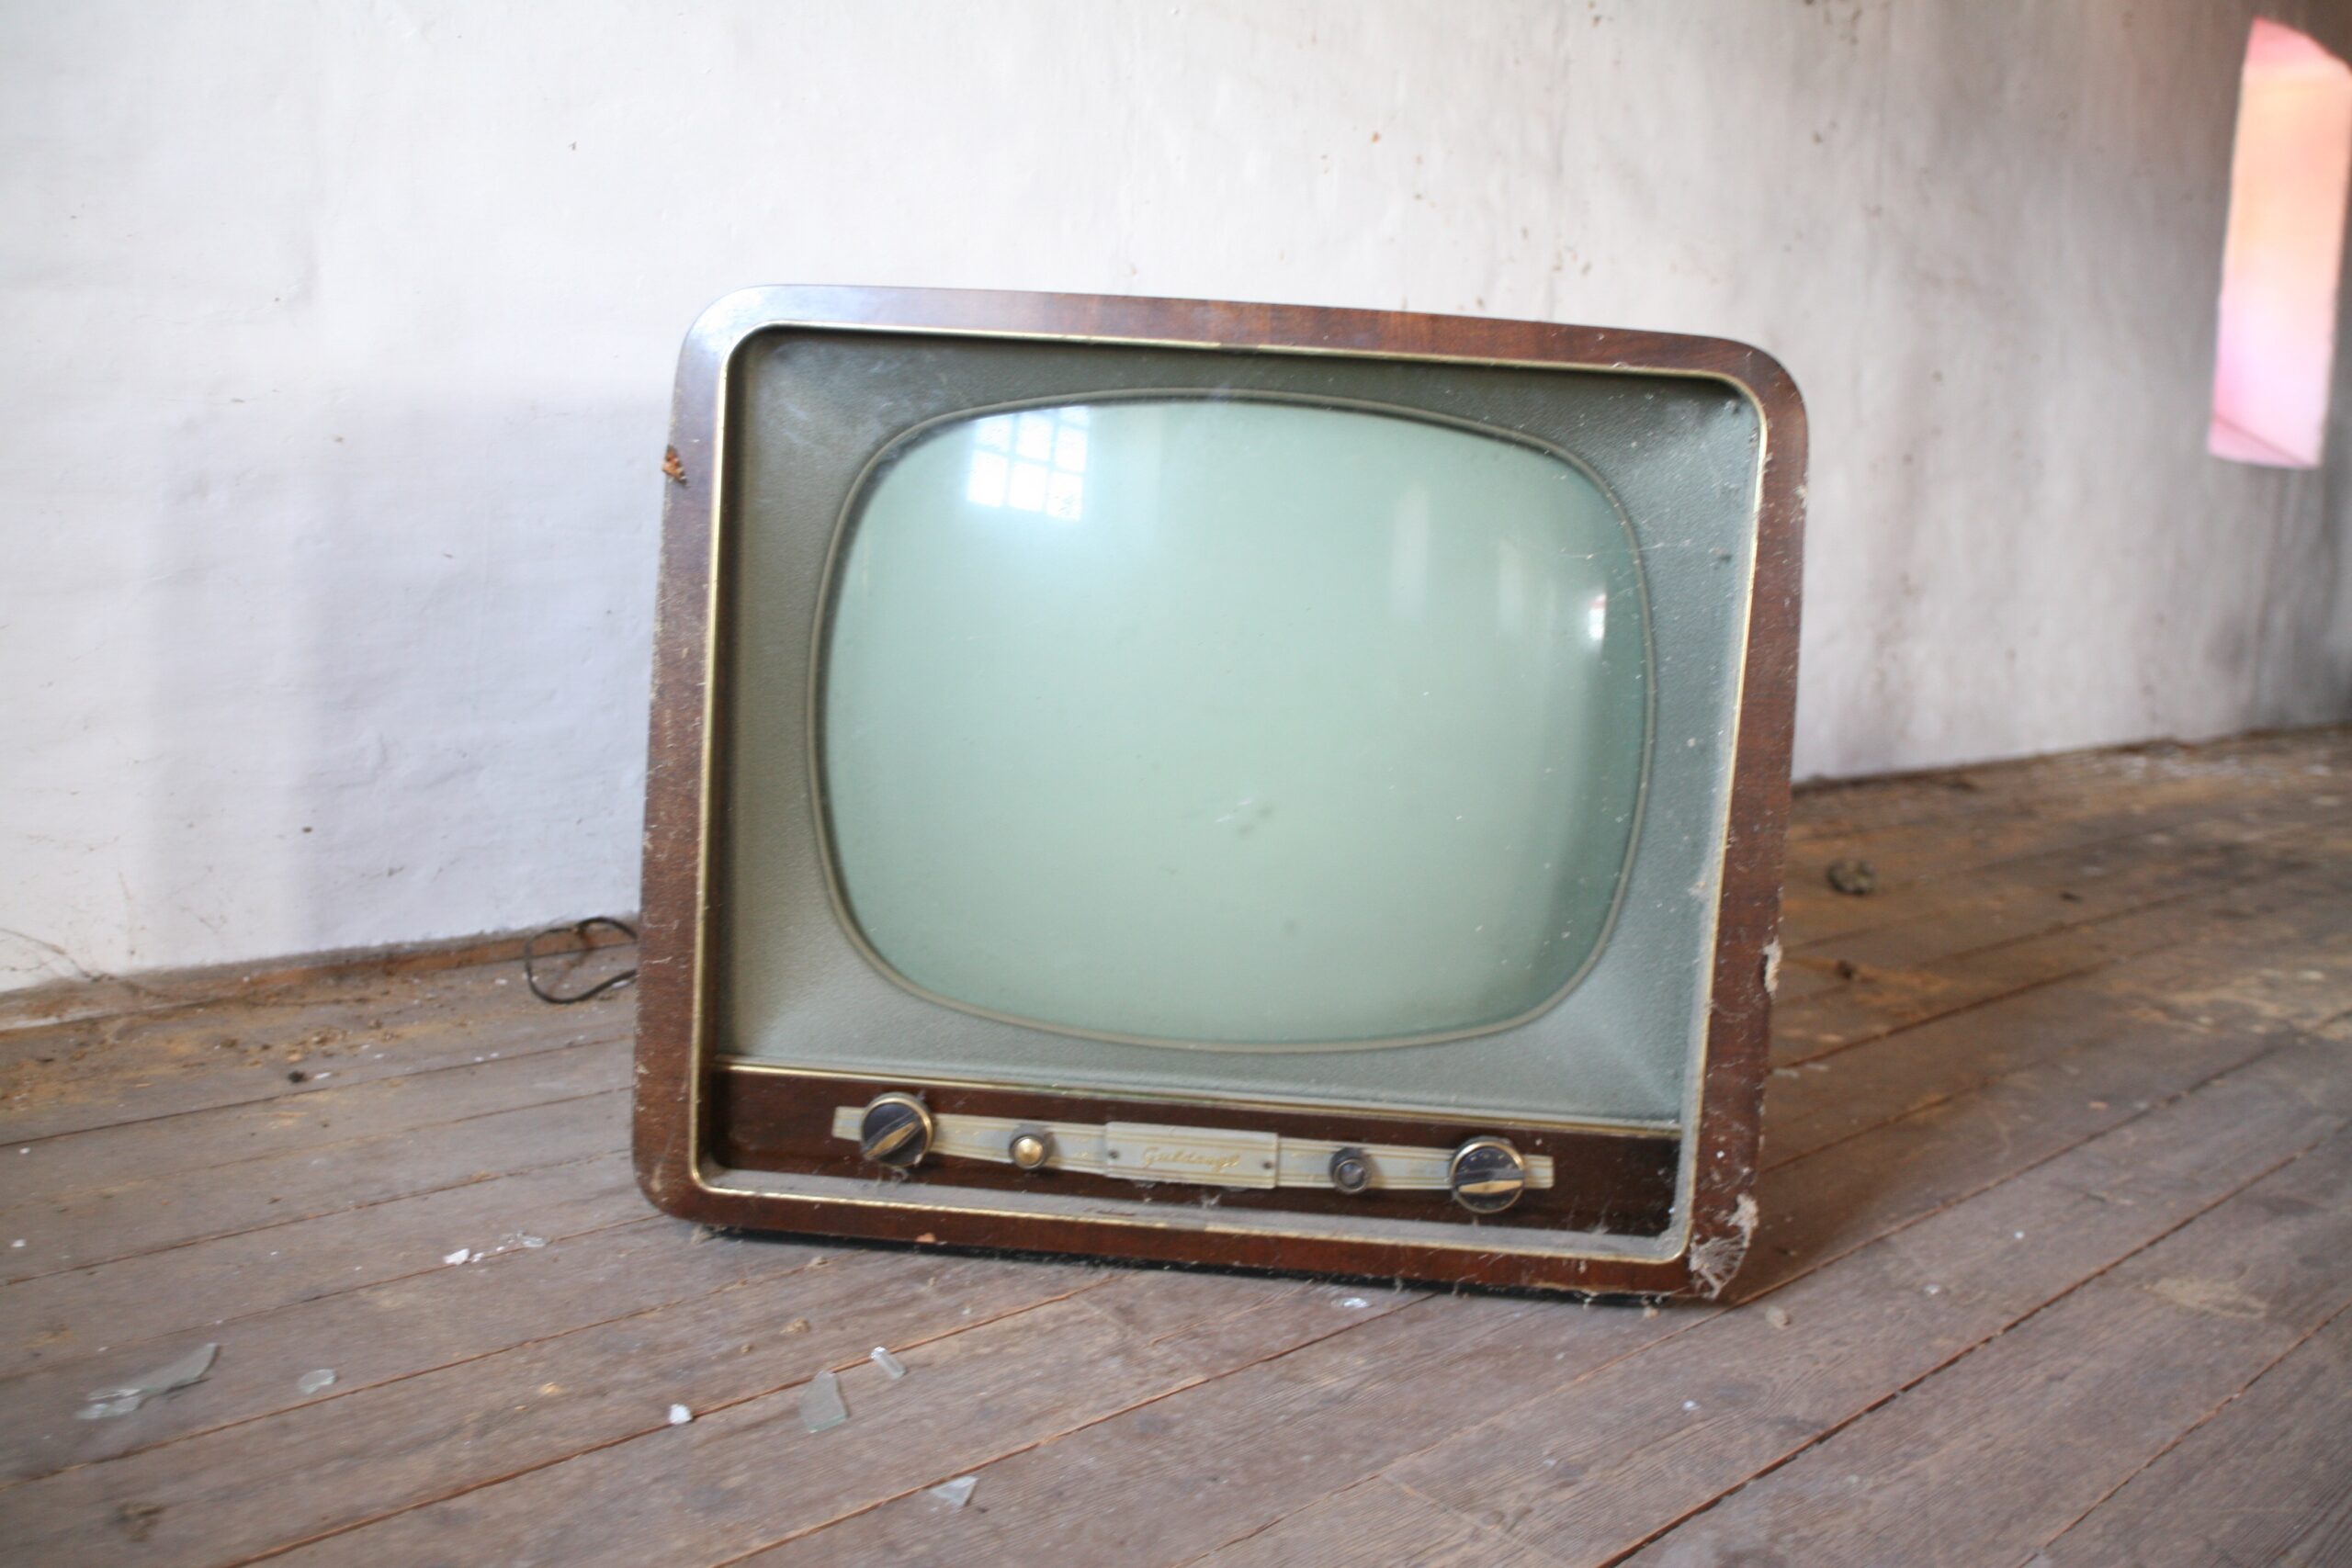 Traditional TV is on a path to becoming irrelevant